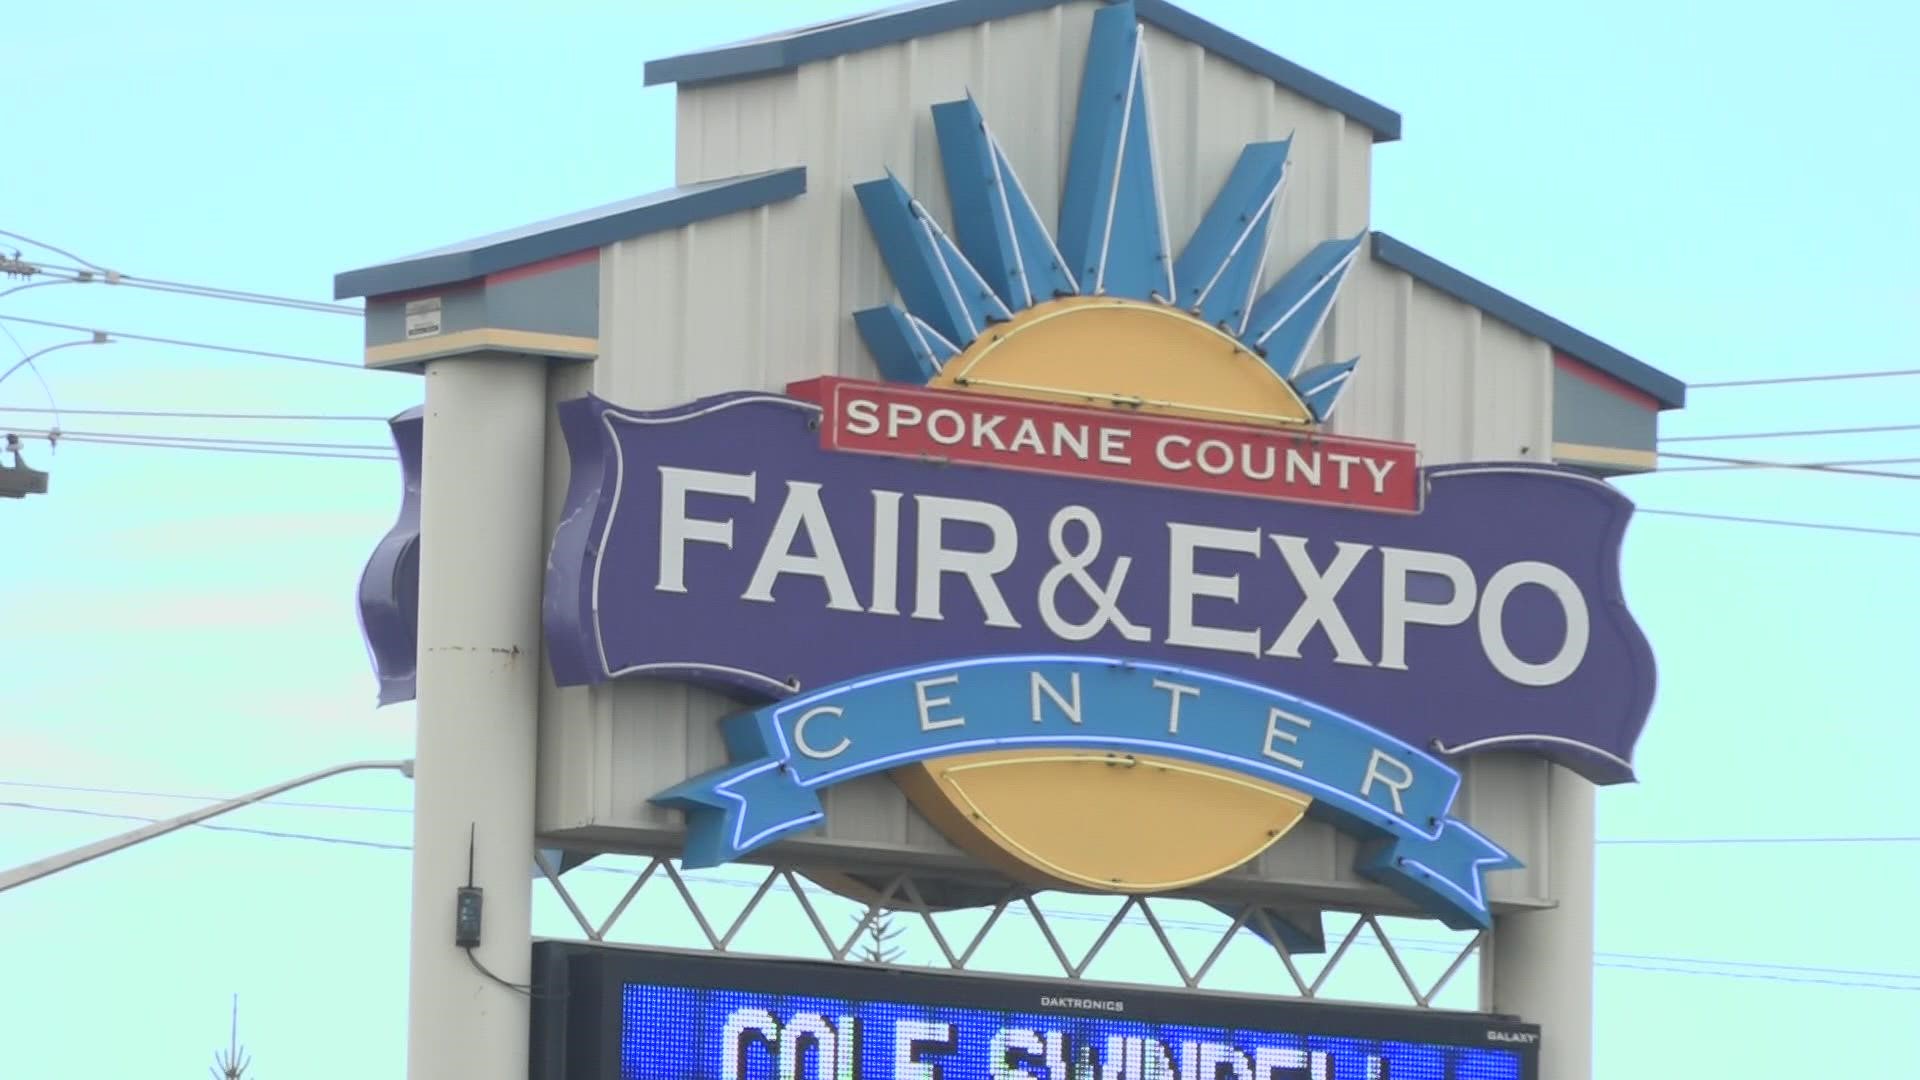 The Spokane County Interstate Fair is right around the corner. KREM 2 has you covered with all the details to help you plan your experience.